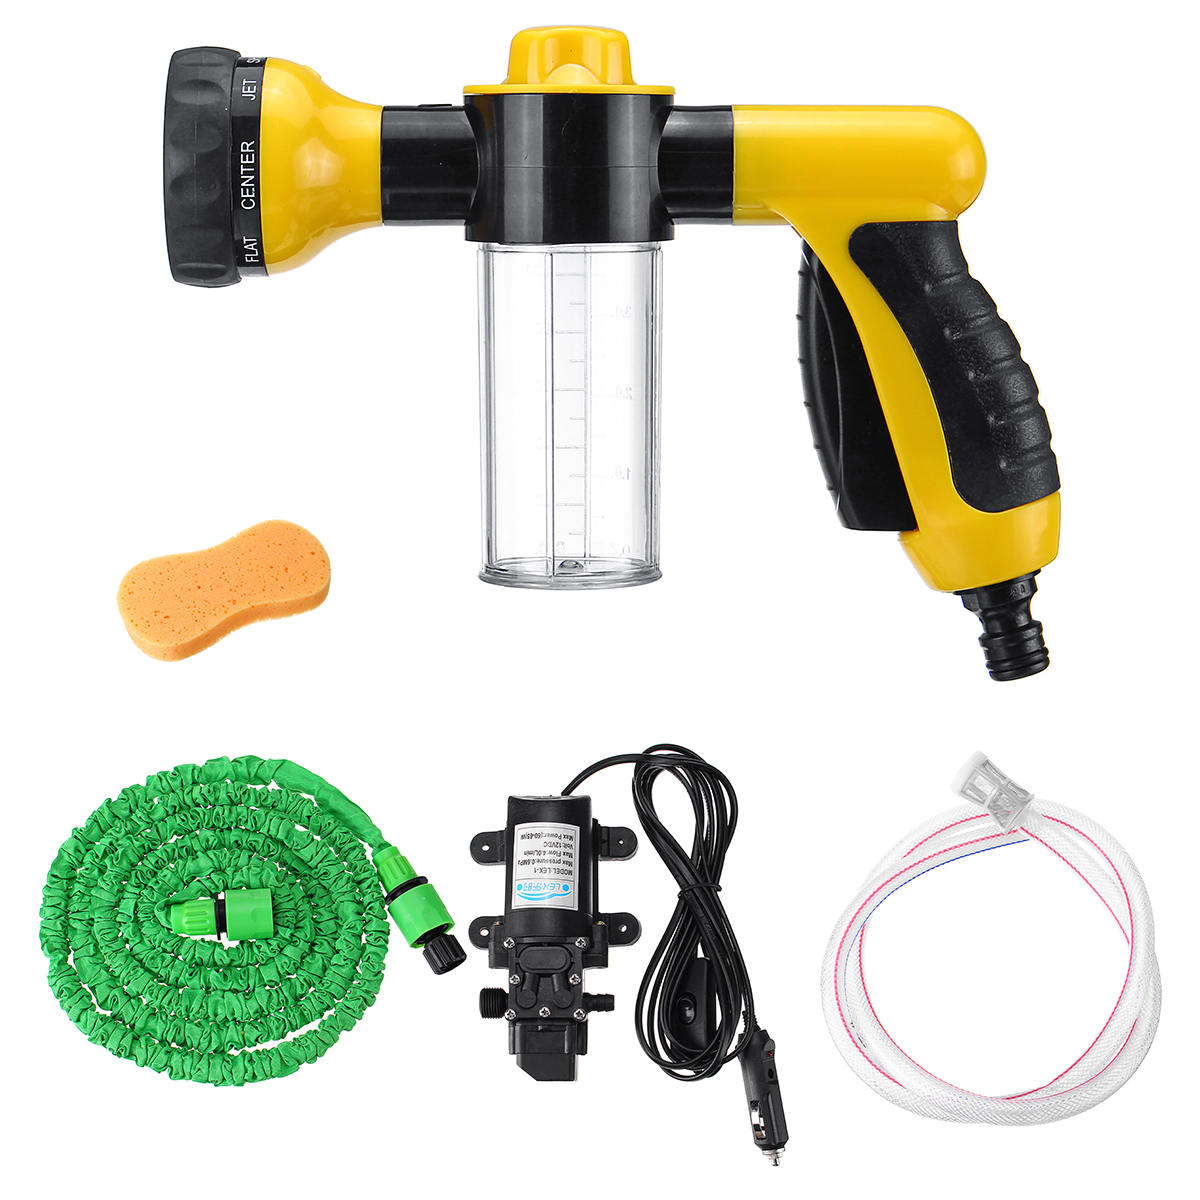 

12V Portable High Pressure Electric Car Wash Washer Water Pump Sprayer Kit Foam Water Cleaning Kit